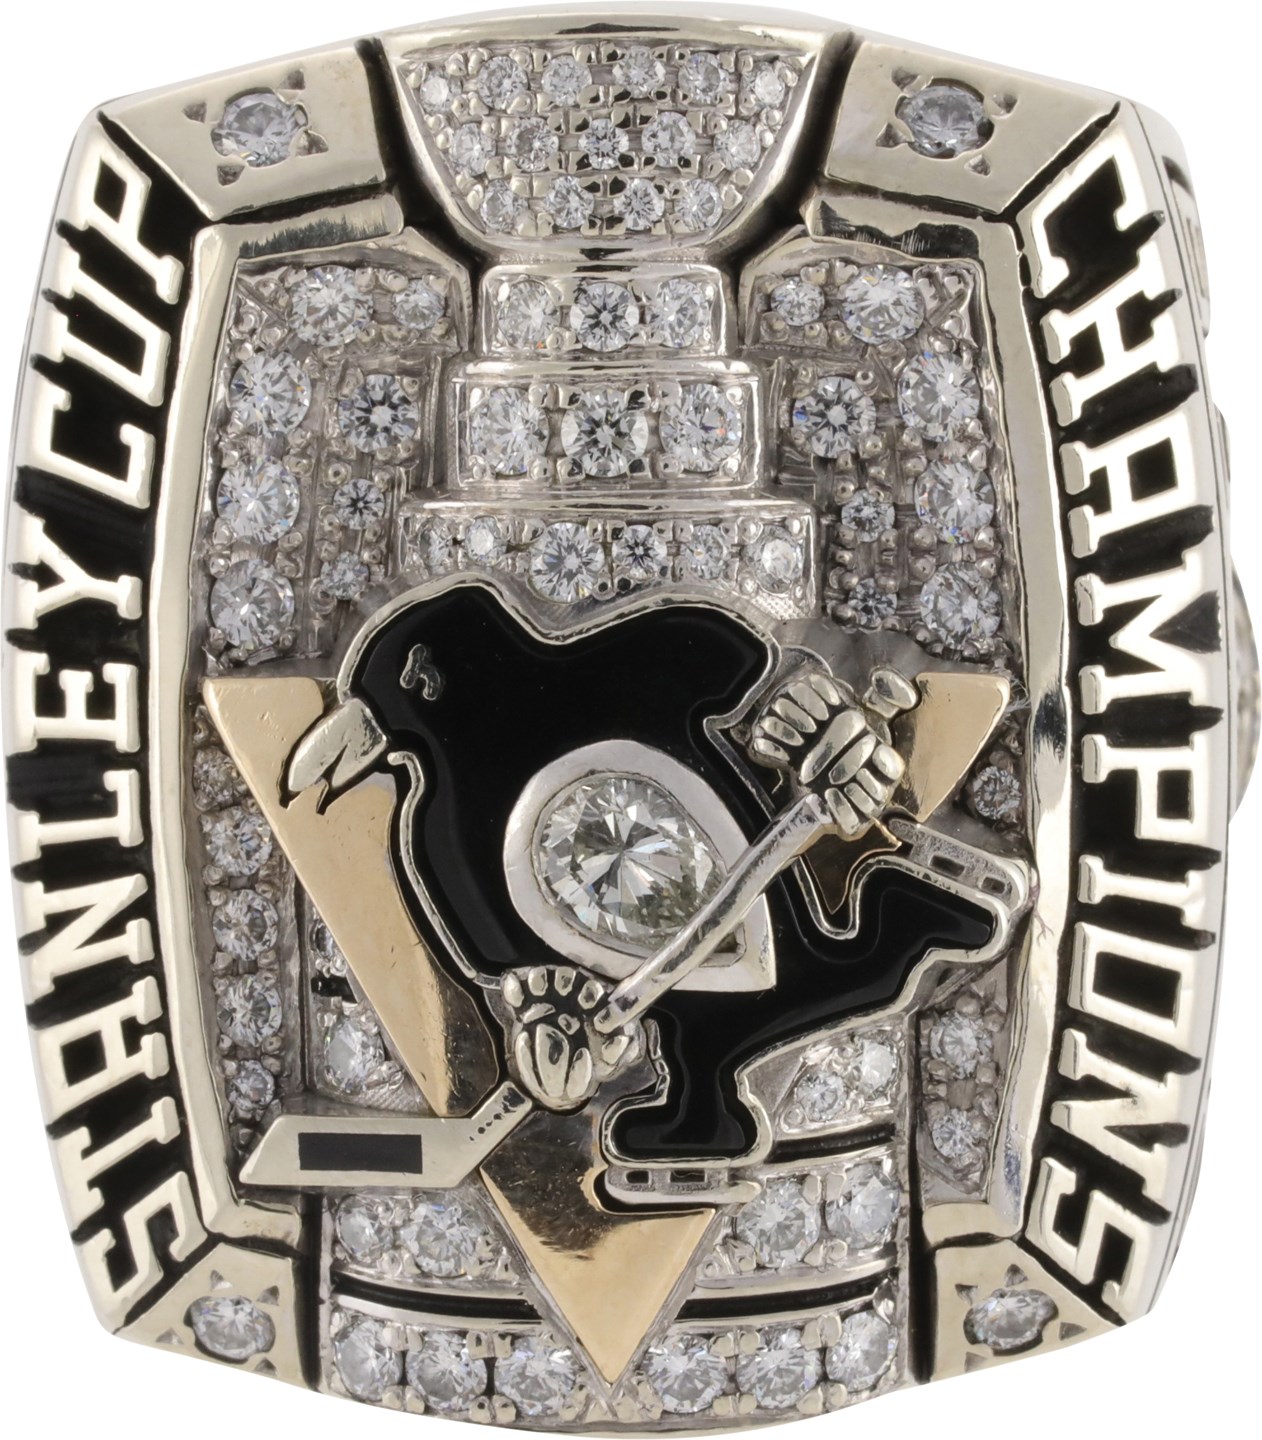 Hockey - 2009 Phil Bourque Pittsburgh Penguins Stanley Cup Championship Ring